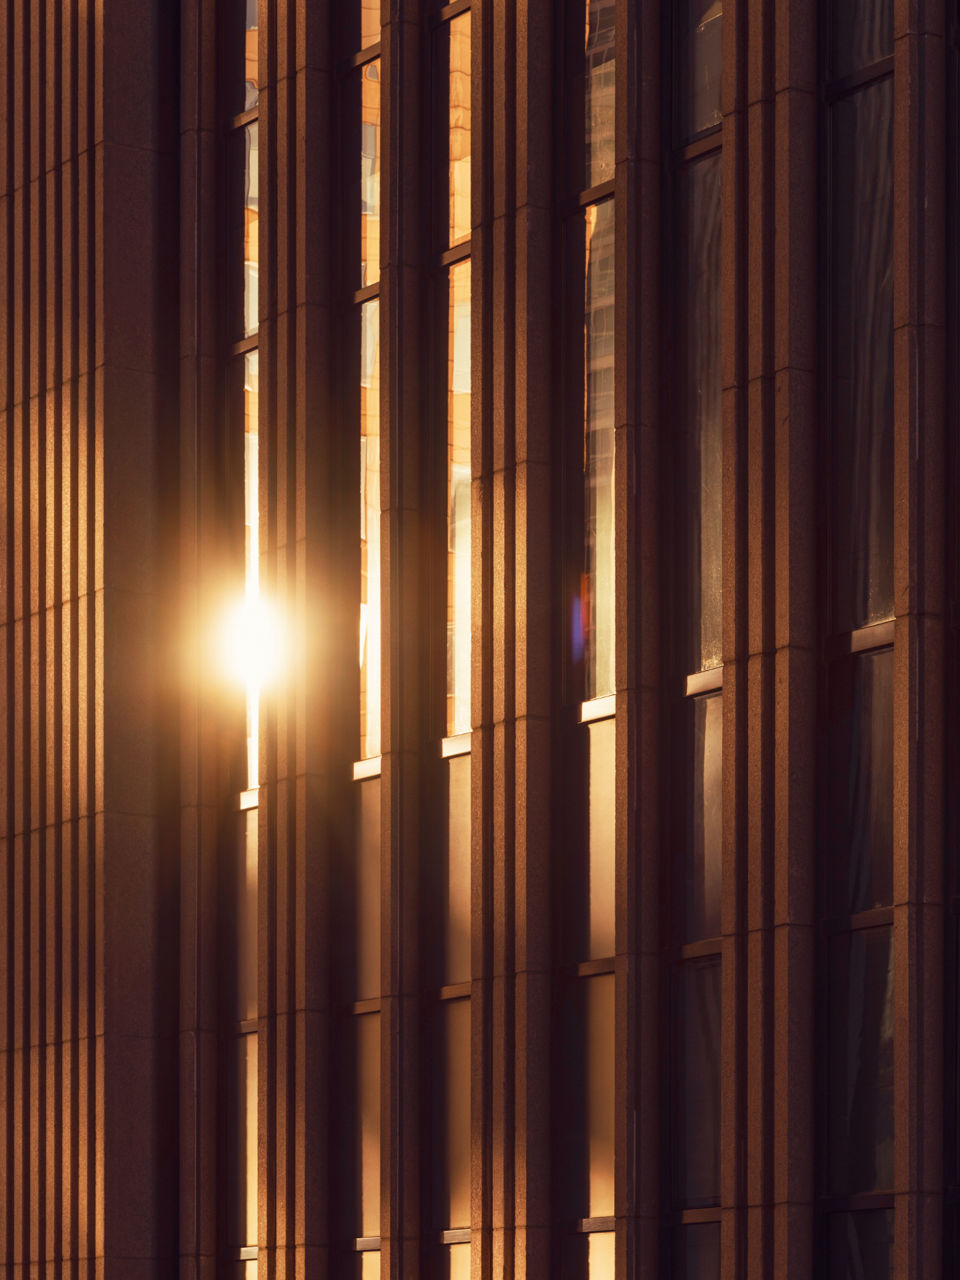 Building Exterior with Sunlight